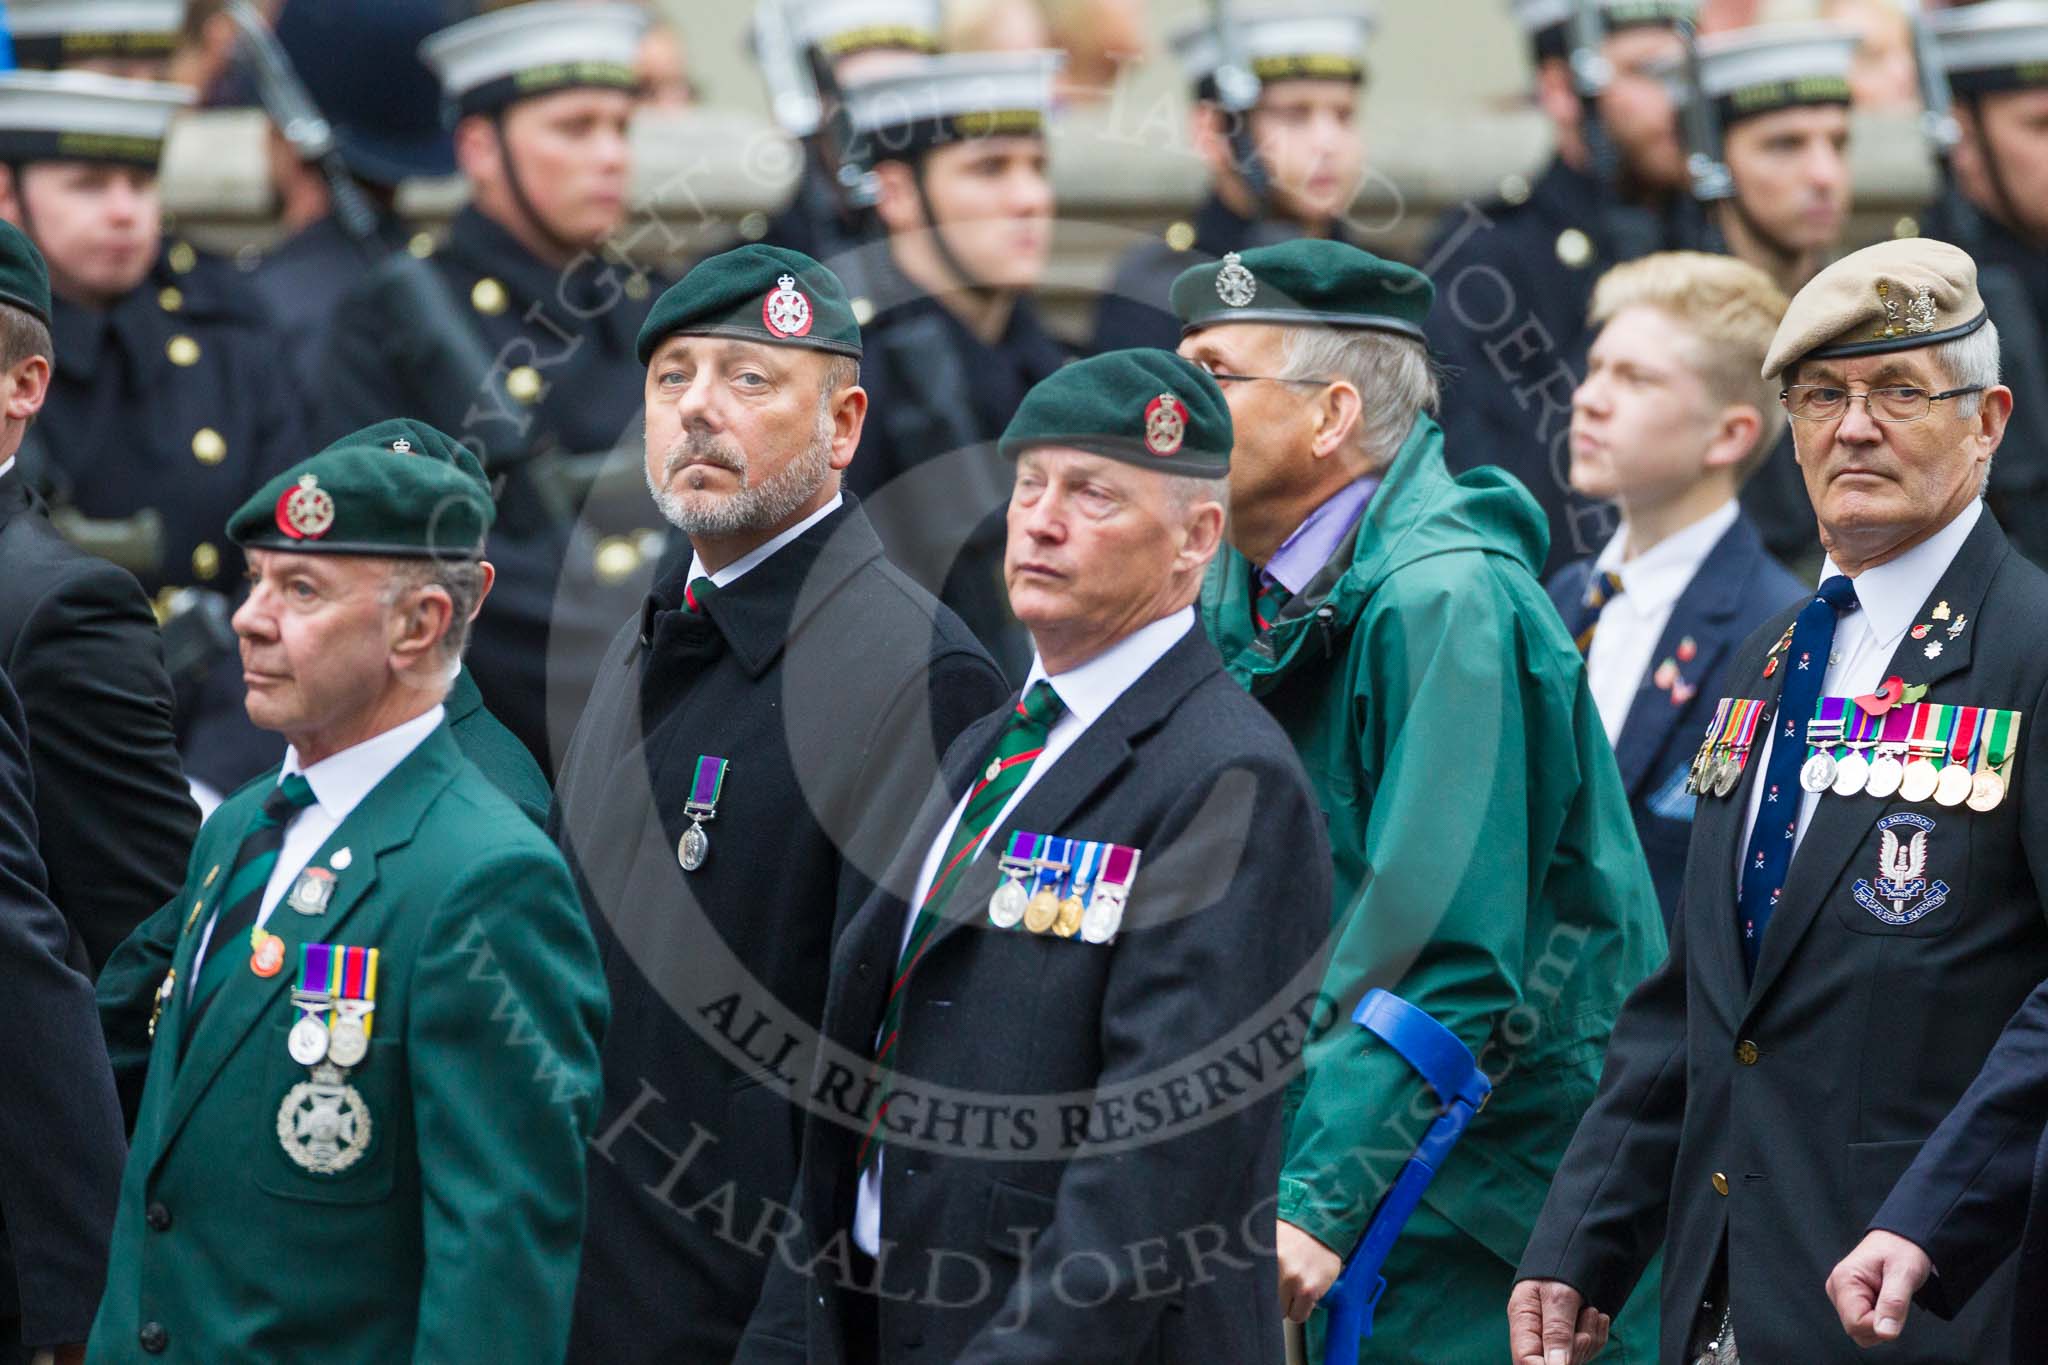 Remembrance Sunday at the Cenotaph 2015: Group A2, Royal Green Jackets Association.
Cenotaph, Whitehall, London SW1,
London,
Greater London,
United Kingdom,
on 08 November 2015 at 12:08, image #1179